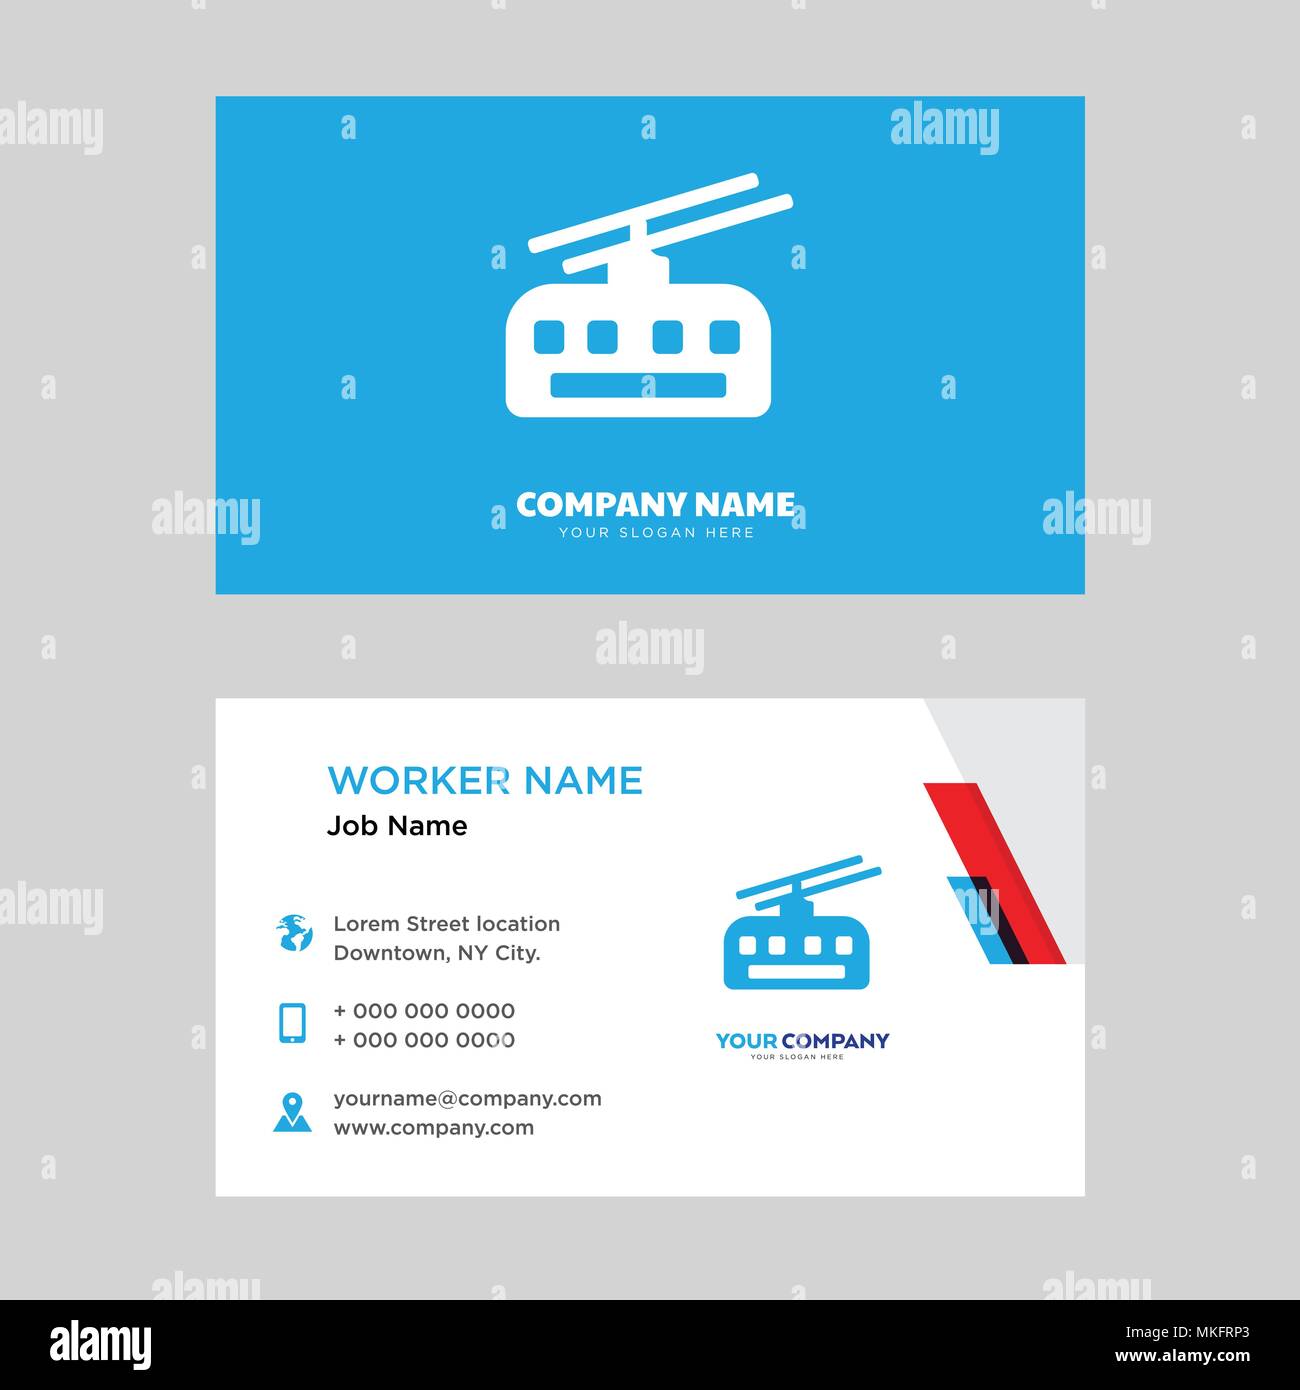 Cable car business card design template, Visiting for your company, Modern horizontal identity Card Vector Stock Vector